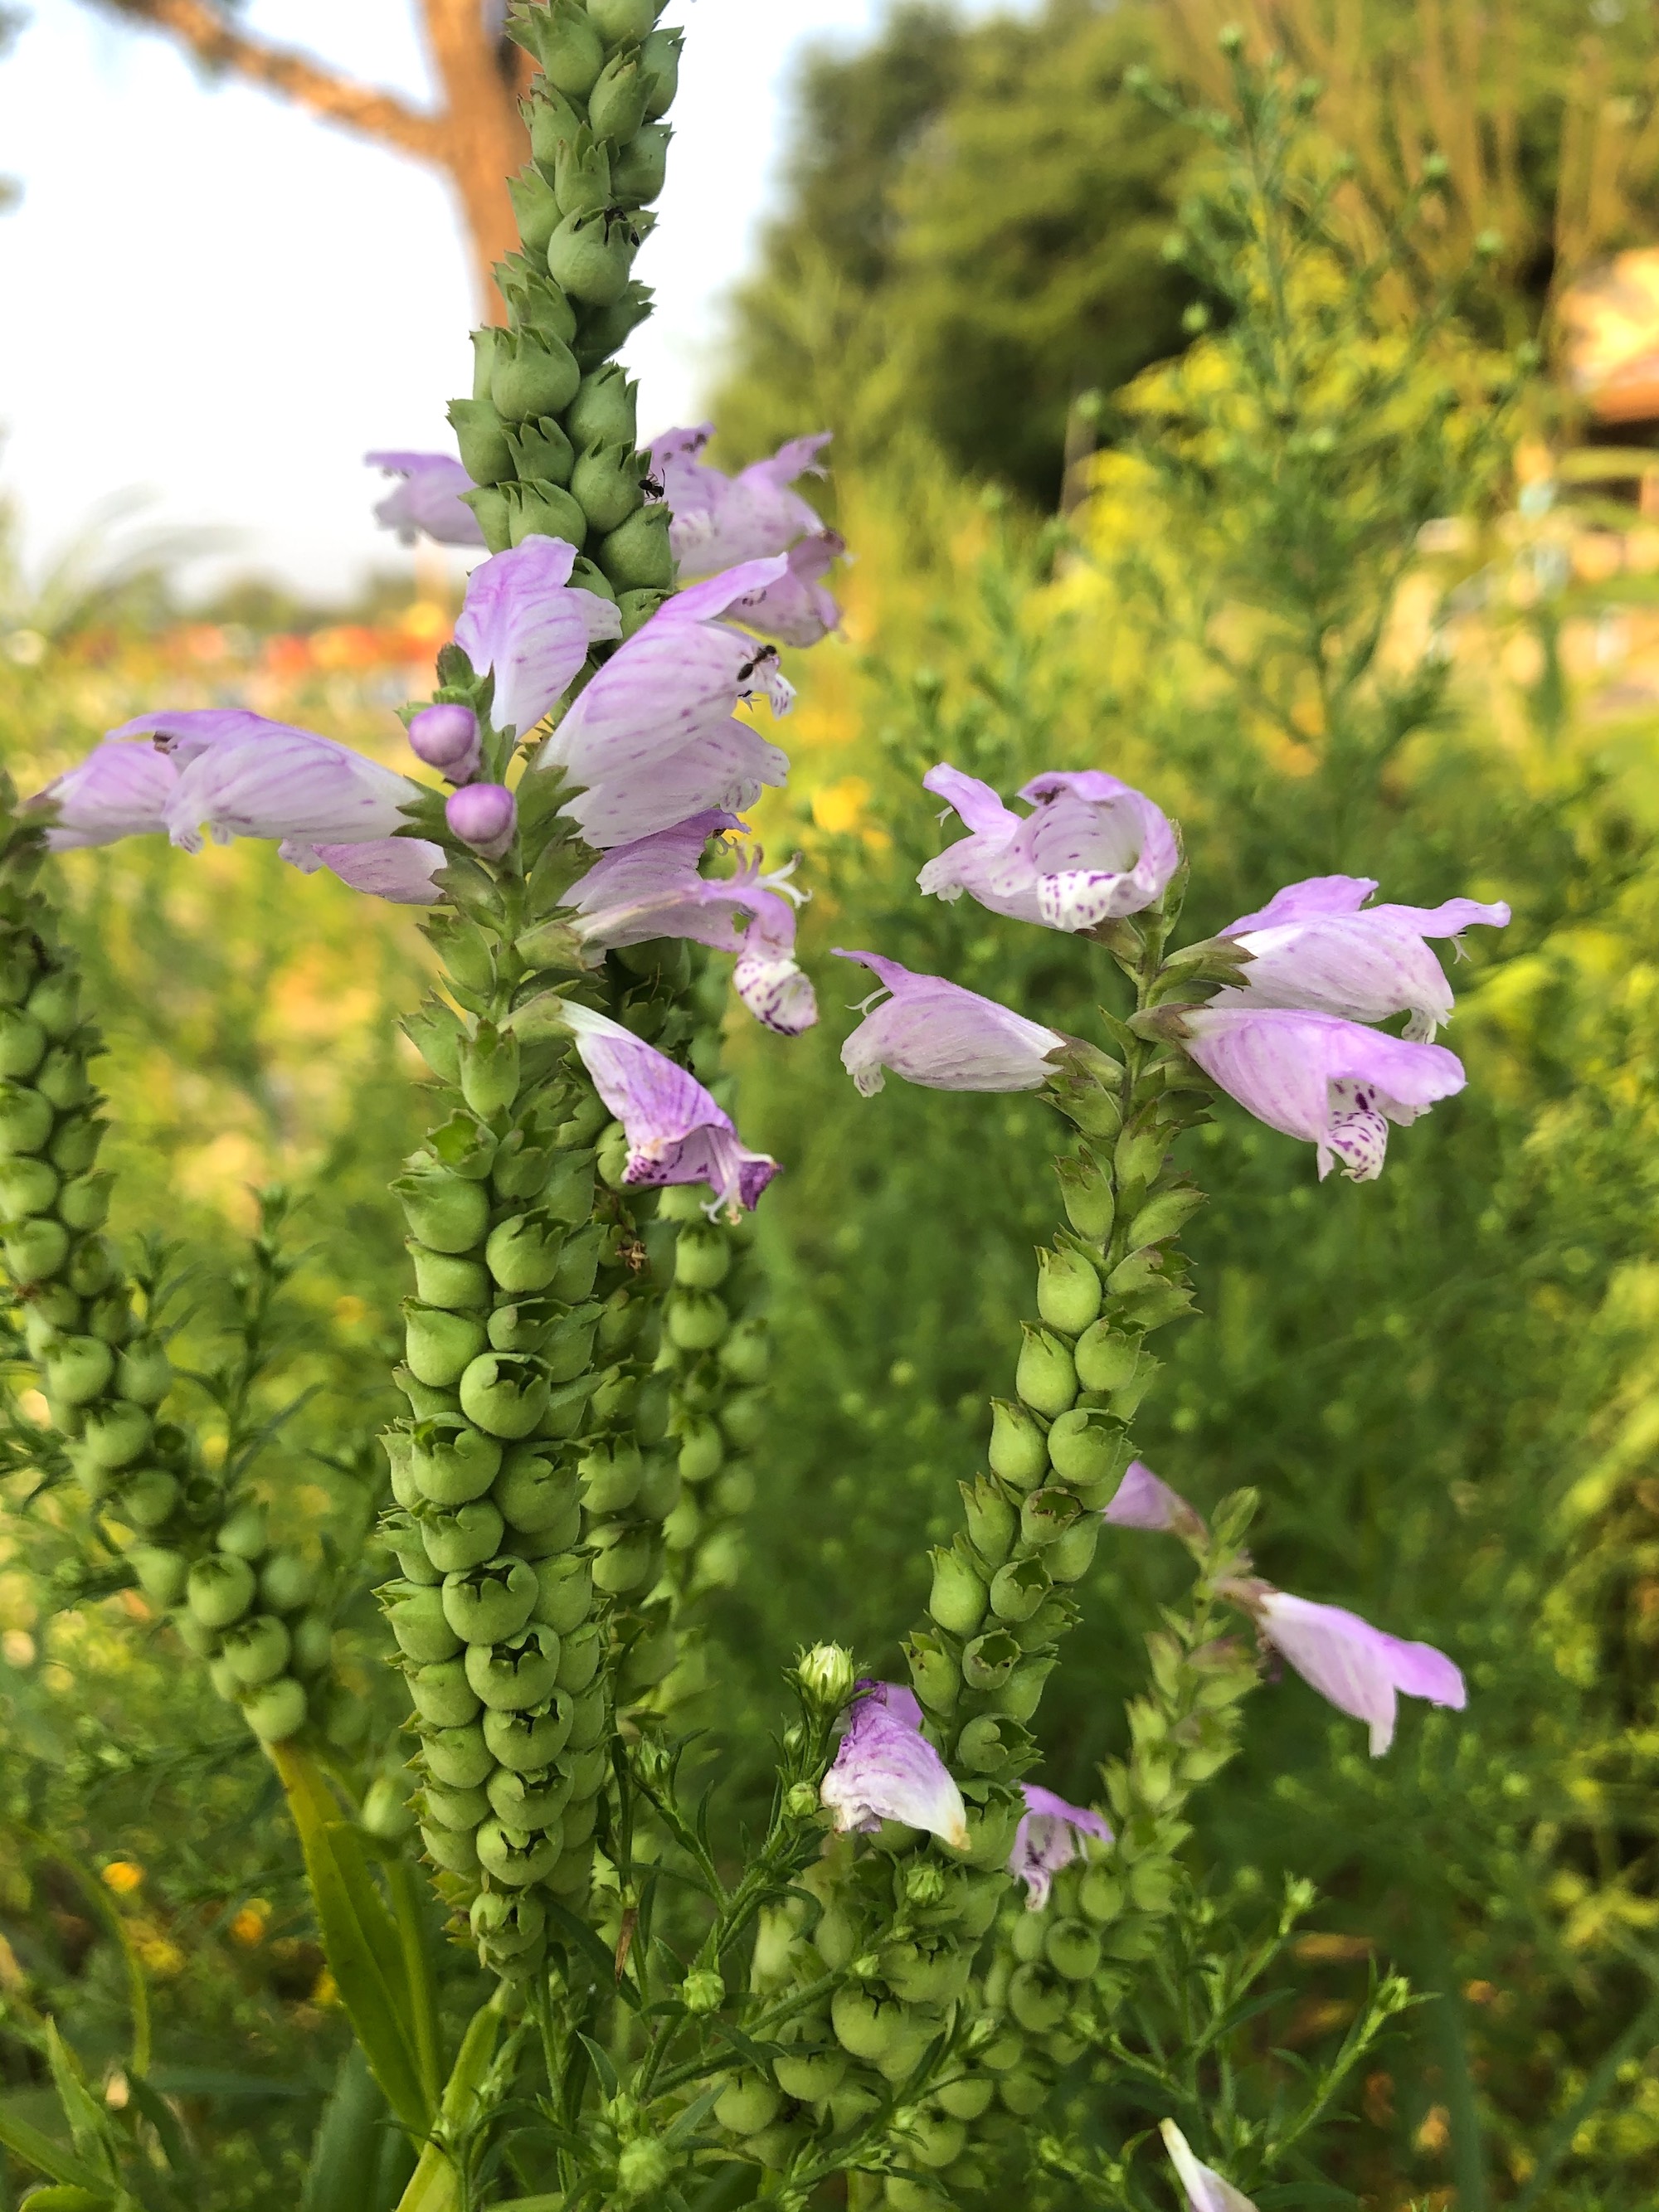 Obedient Plant on shore of Lake Wingra in Wingra Park in Madison, Wisconsin on August 12, 2020.